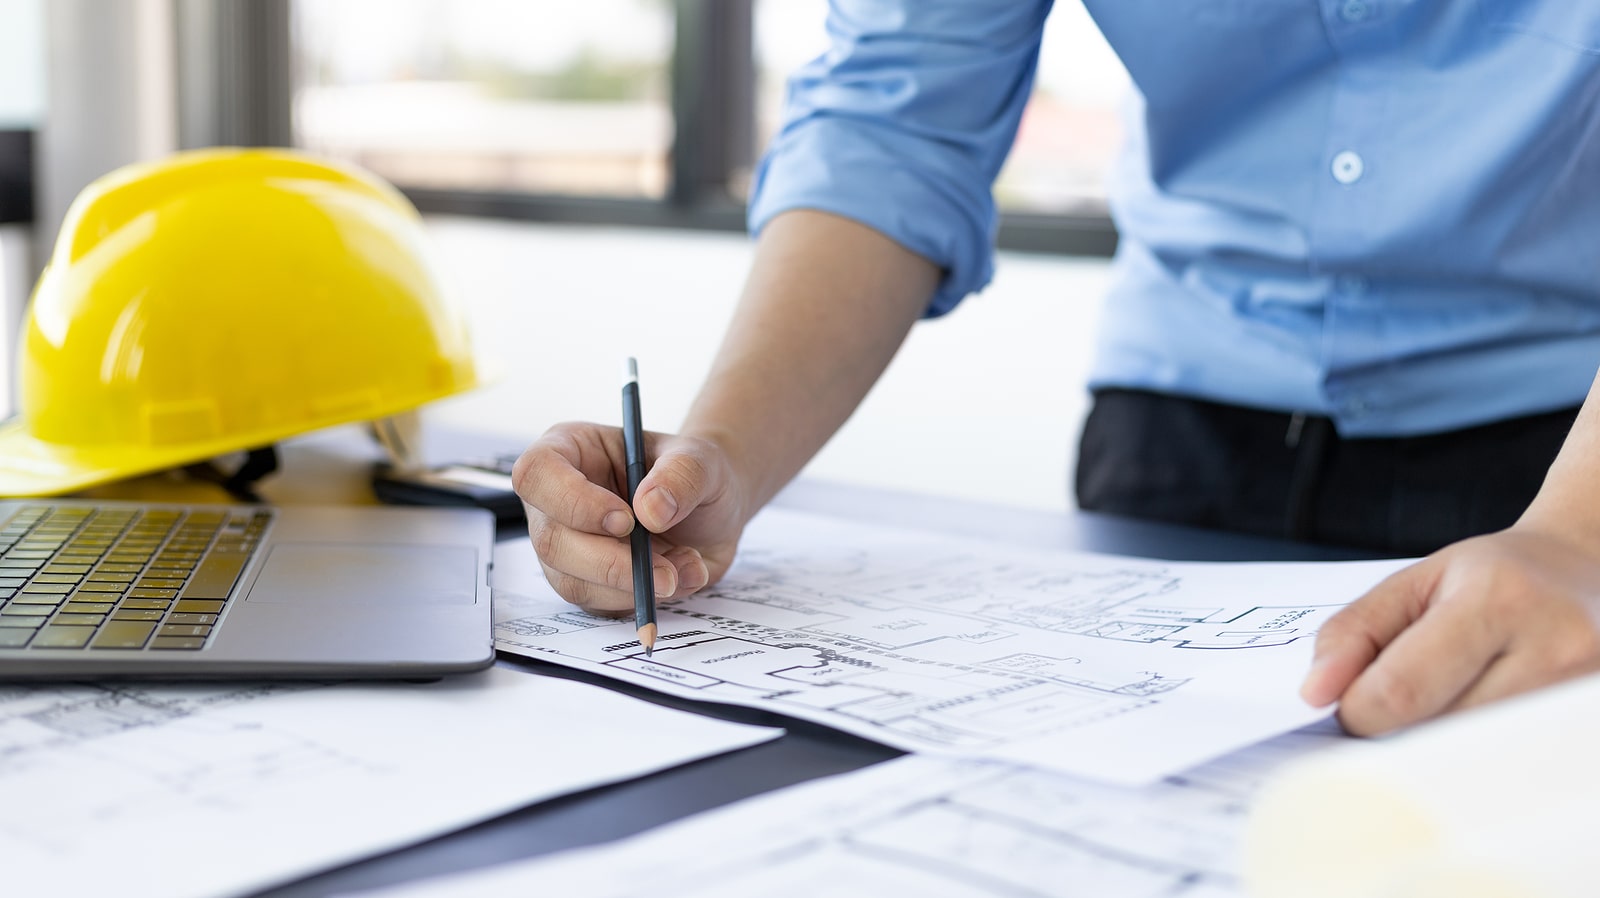 A person creating an architectural blueprint with a hard hat in the background.